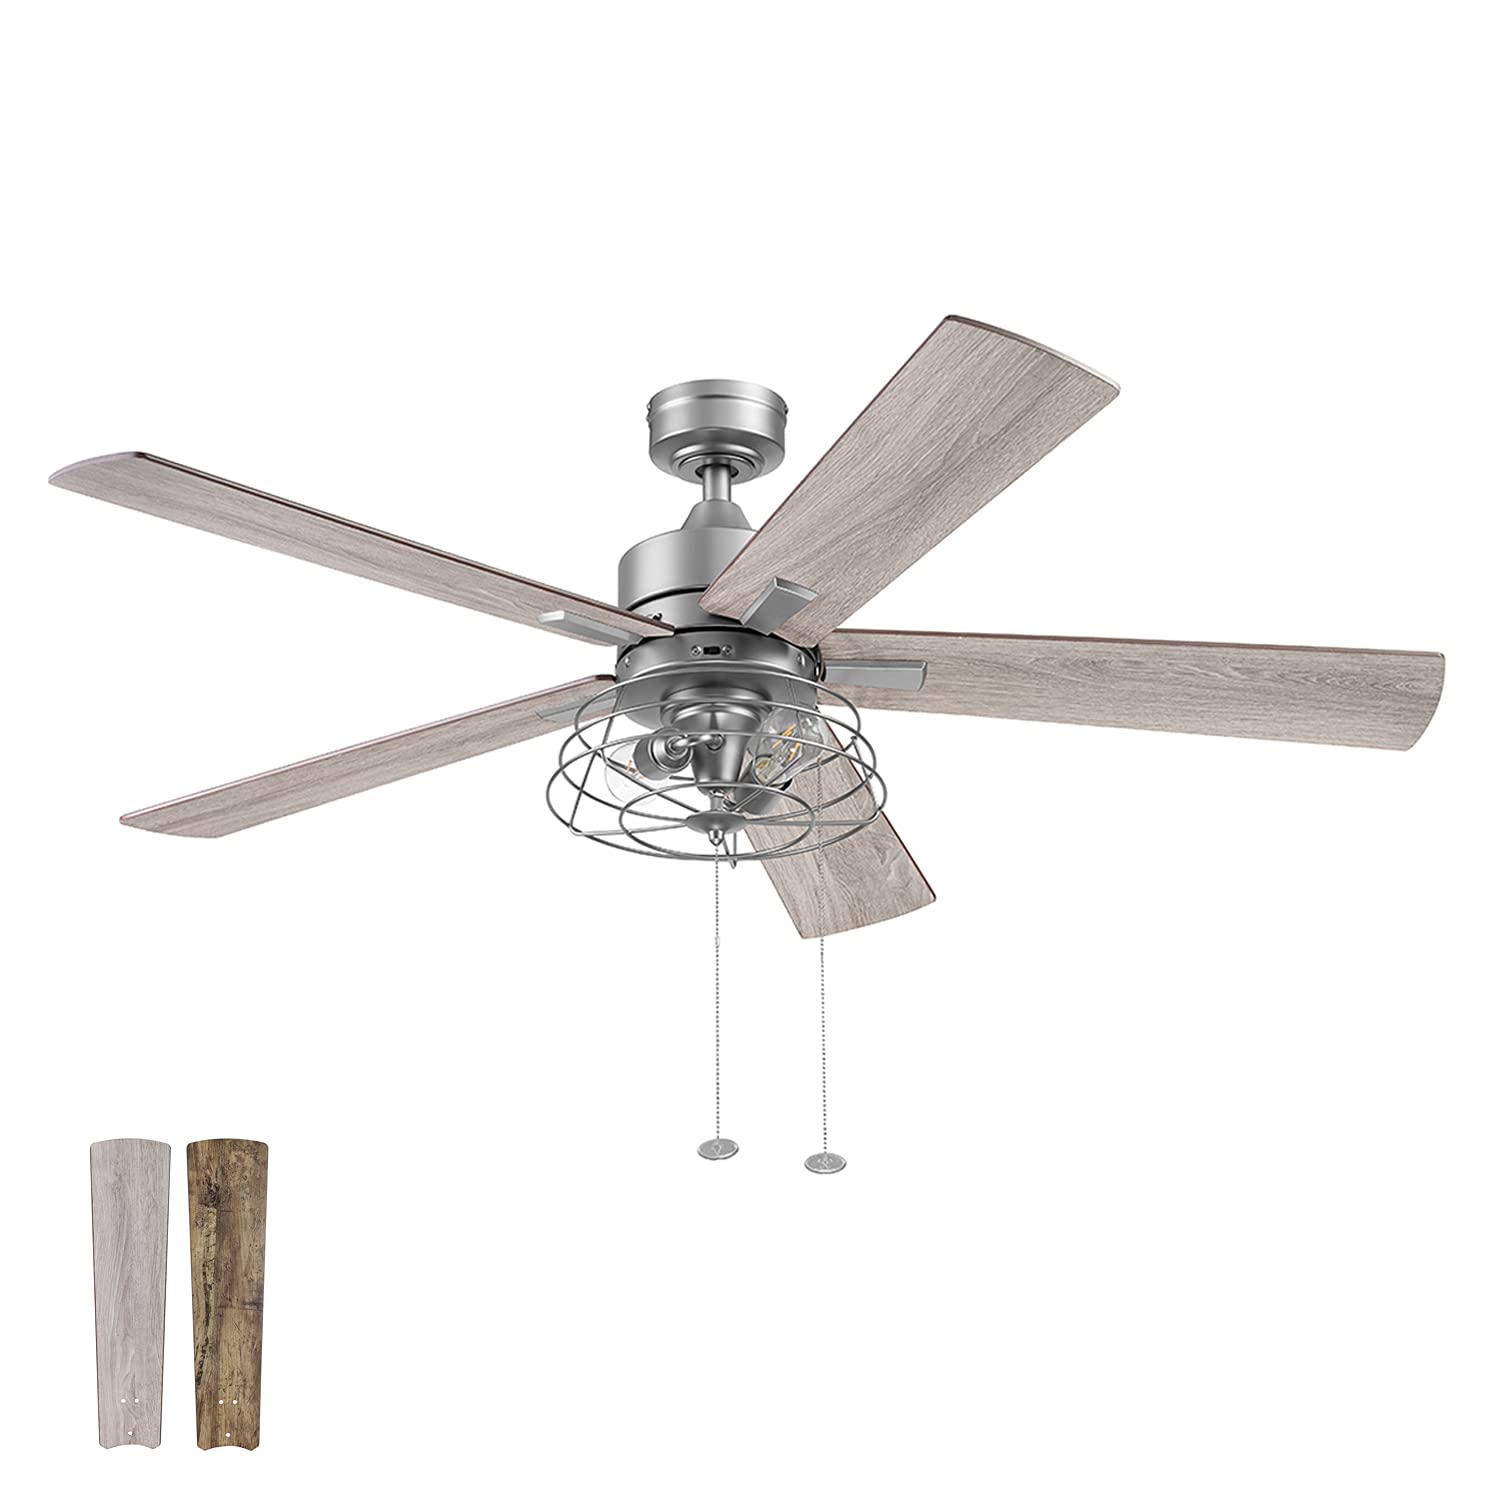 Prominence Home Marshall Ceiling Fan - 52-in Indoor Fan with Pull Chain - LED Ceiling Fan with Light - Industrial Room Fan with Dual Finish Blades - Remote Compatible - Model 51458-01 (Pewter)